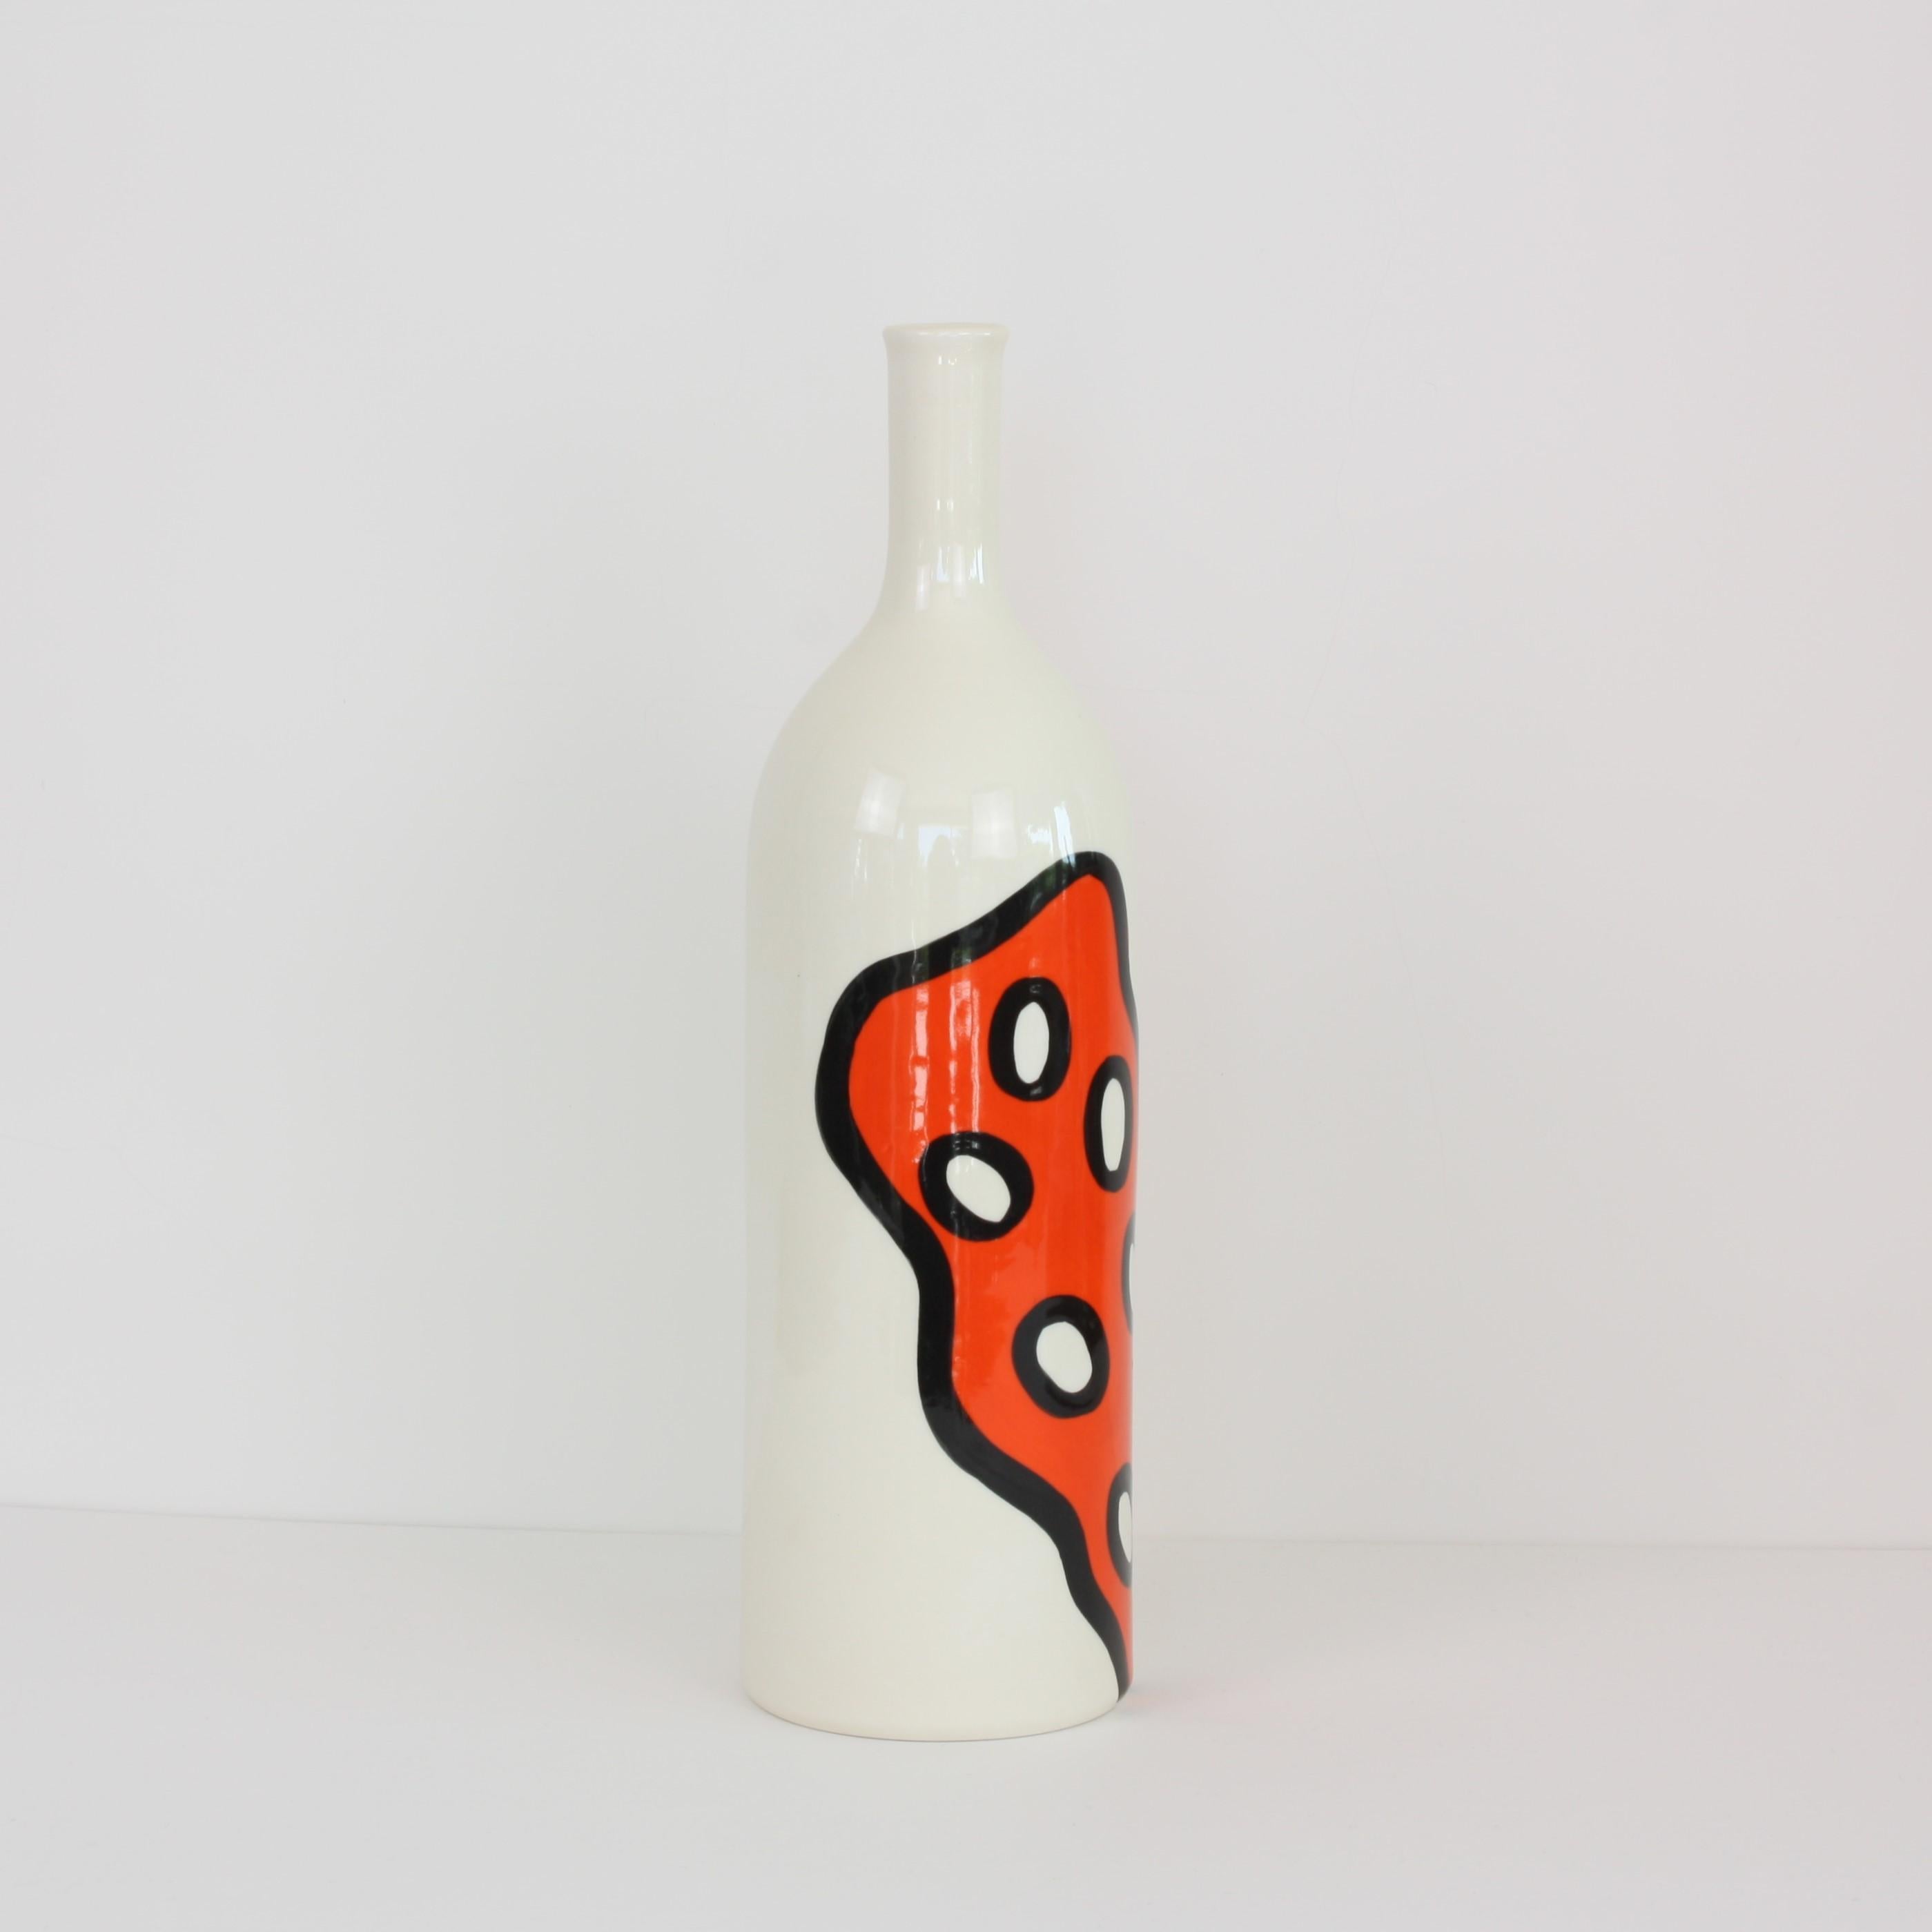 Glazed Set of 3 Contemporary Ceramic Bottles with Nautical Motifs, Corail